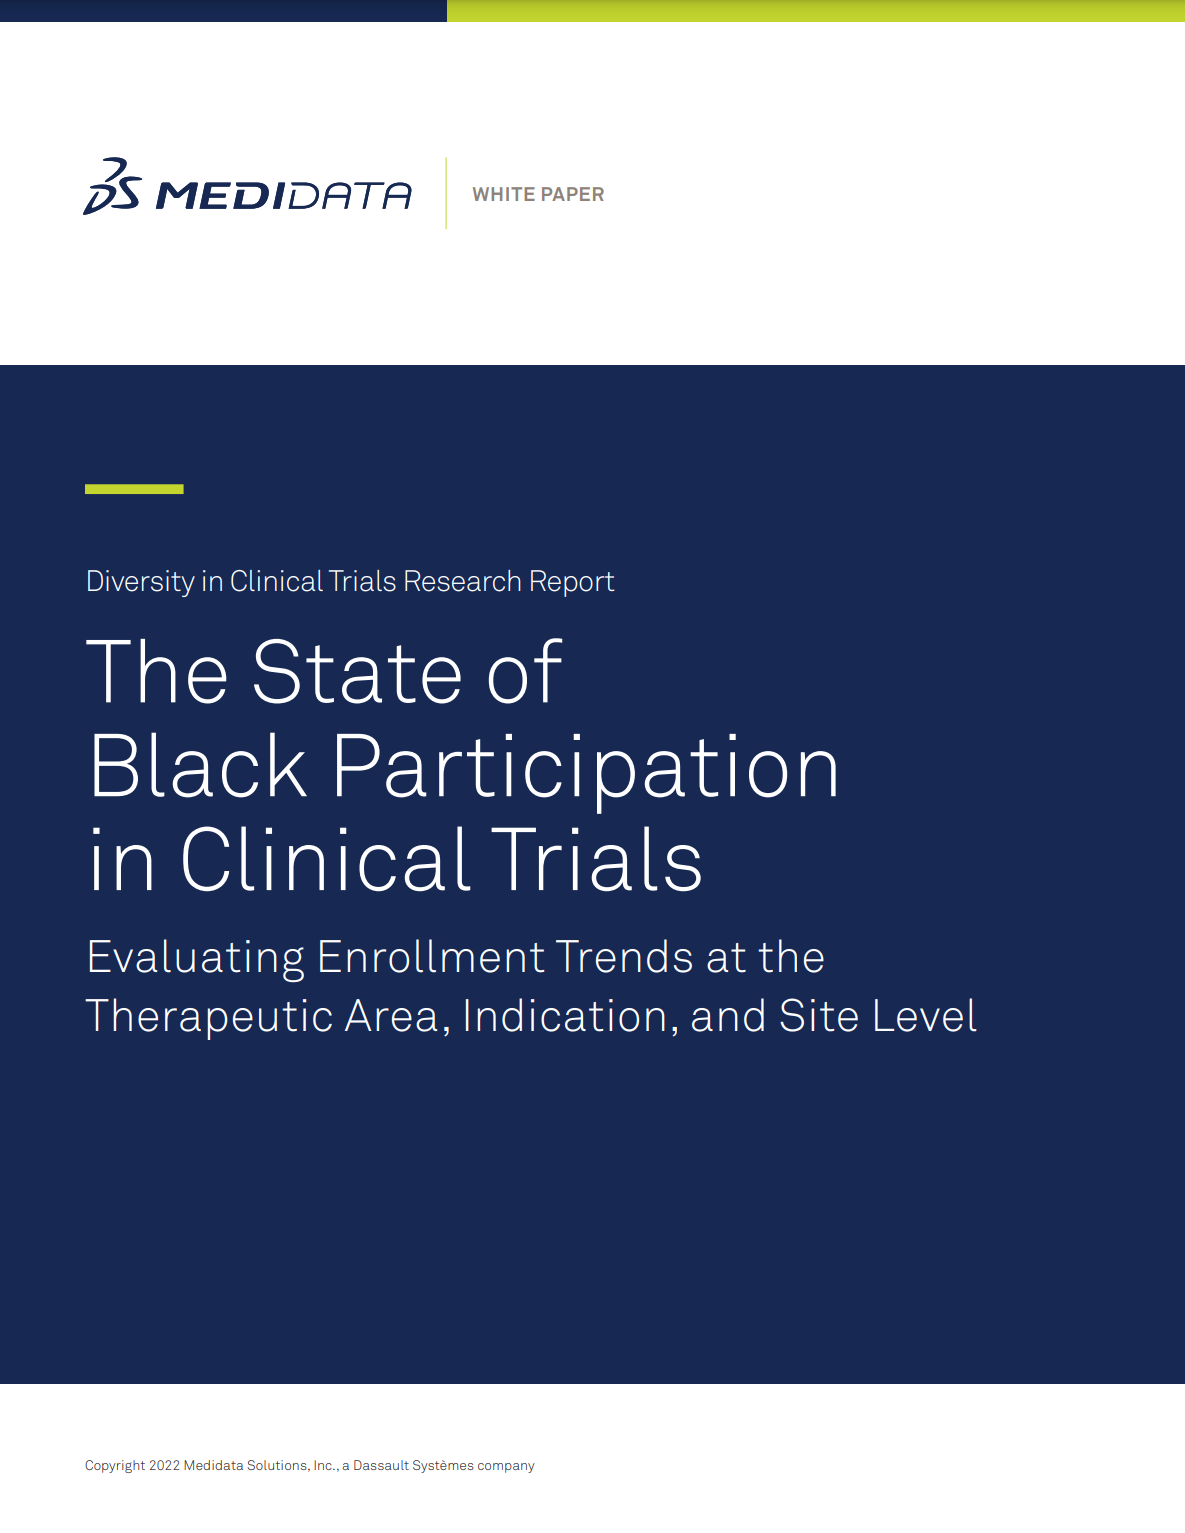 The State of Black Participation in Clinical Trials